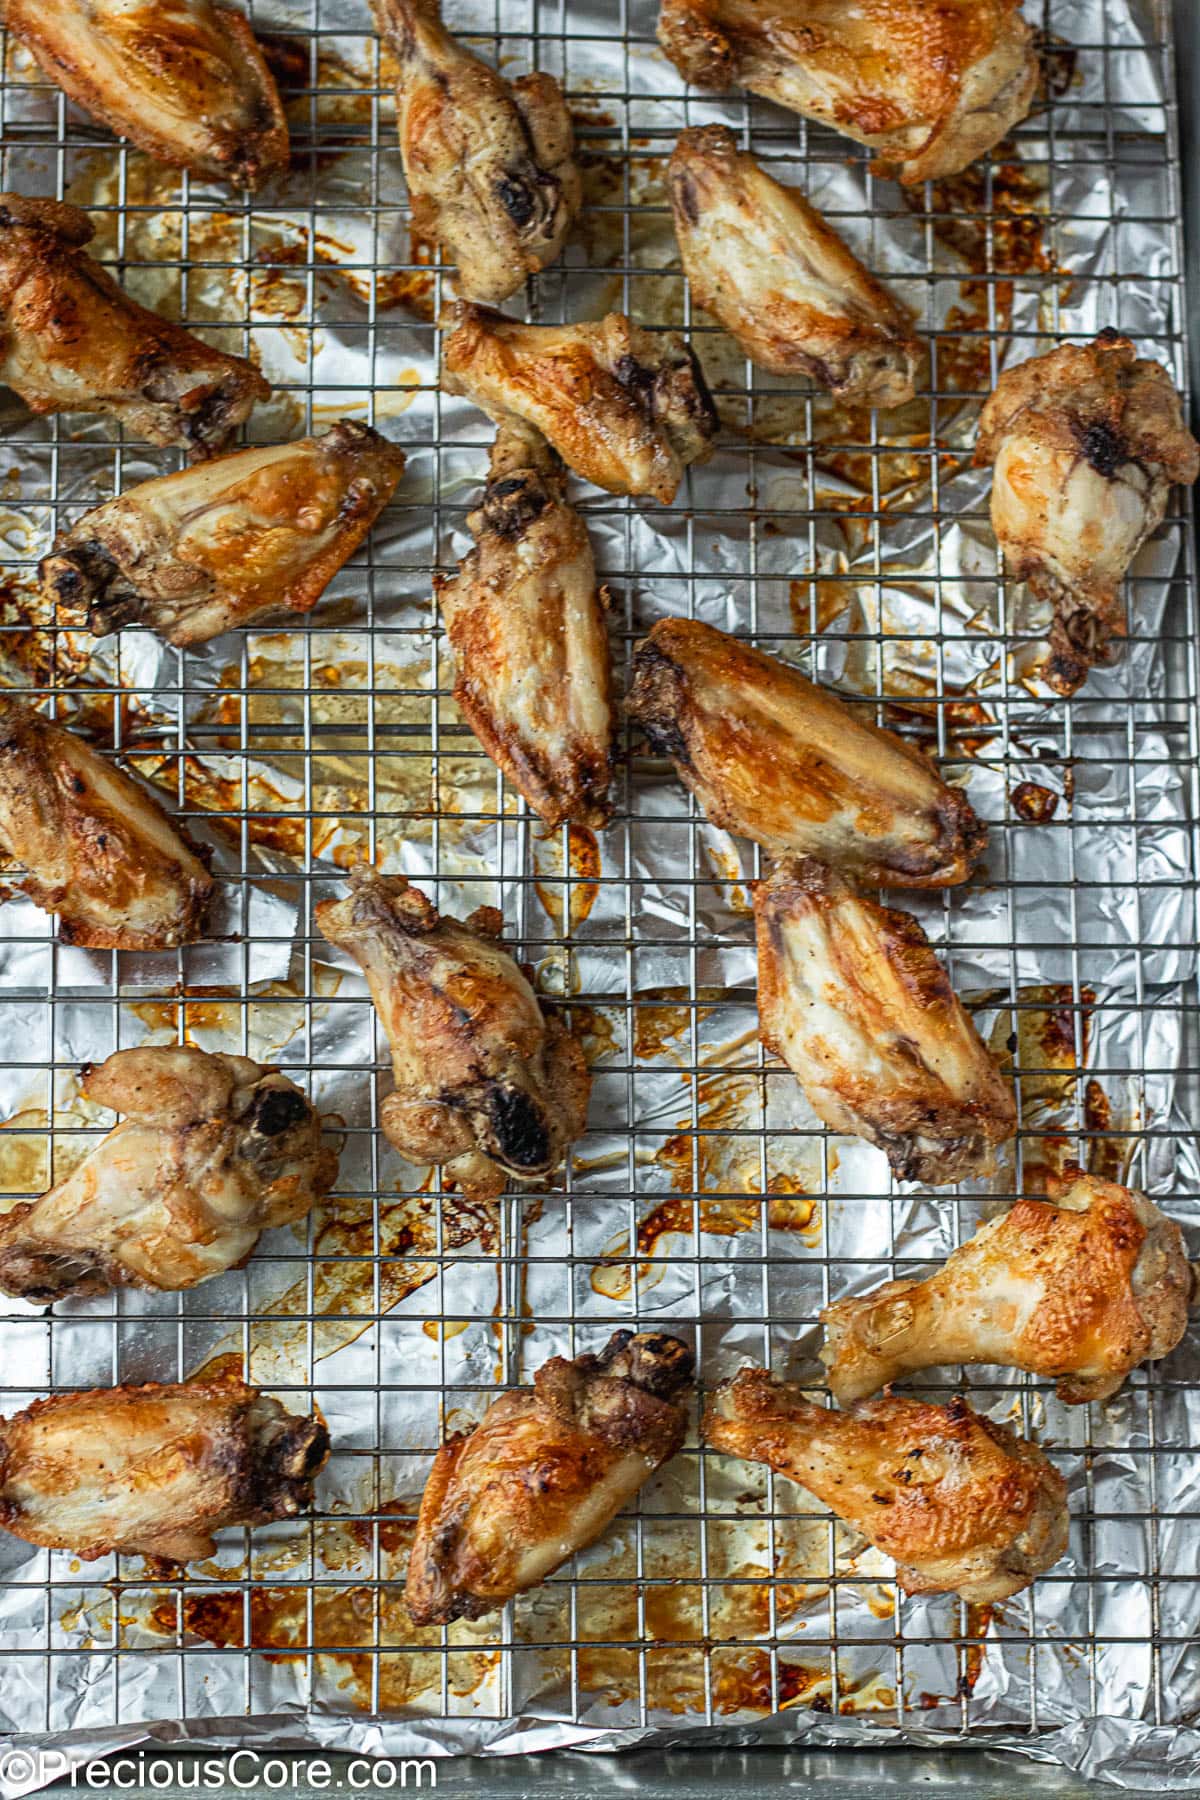 Baked chicken wings on a baking rack.